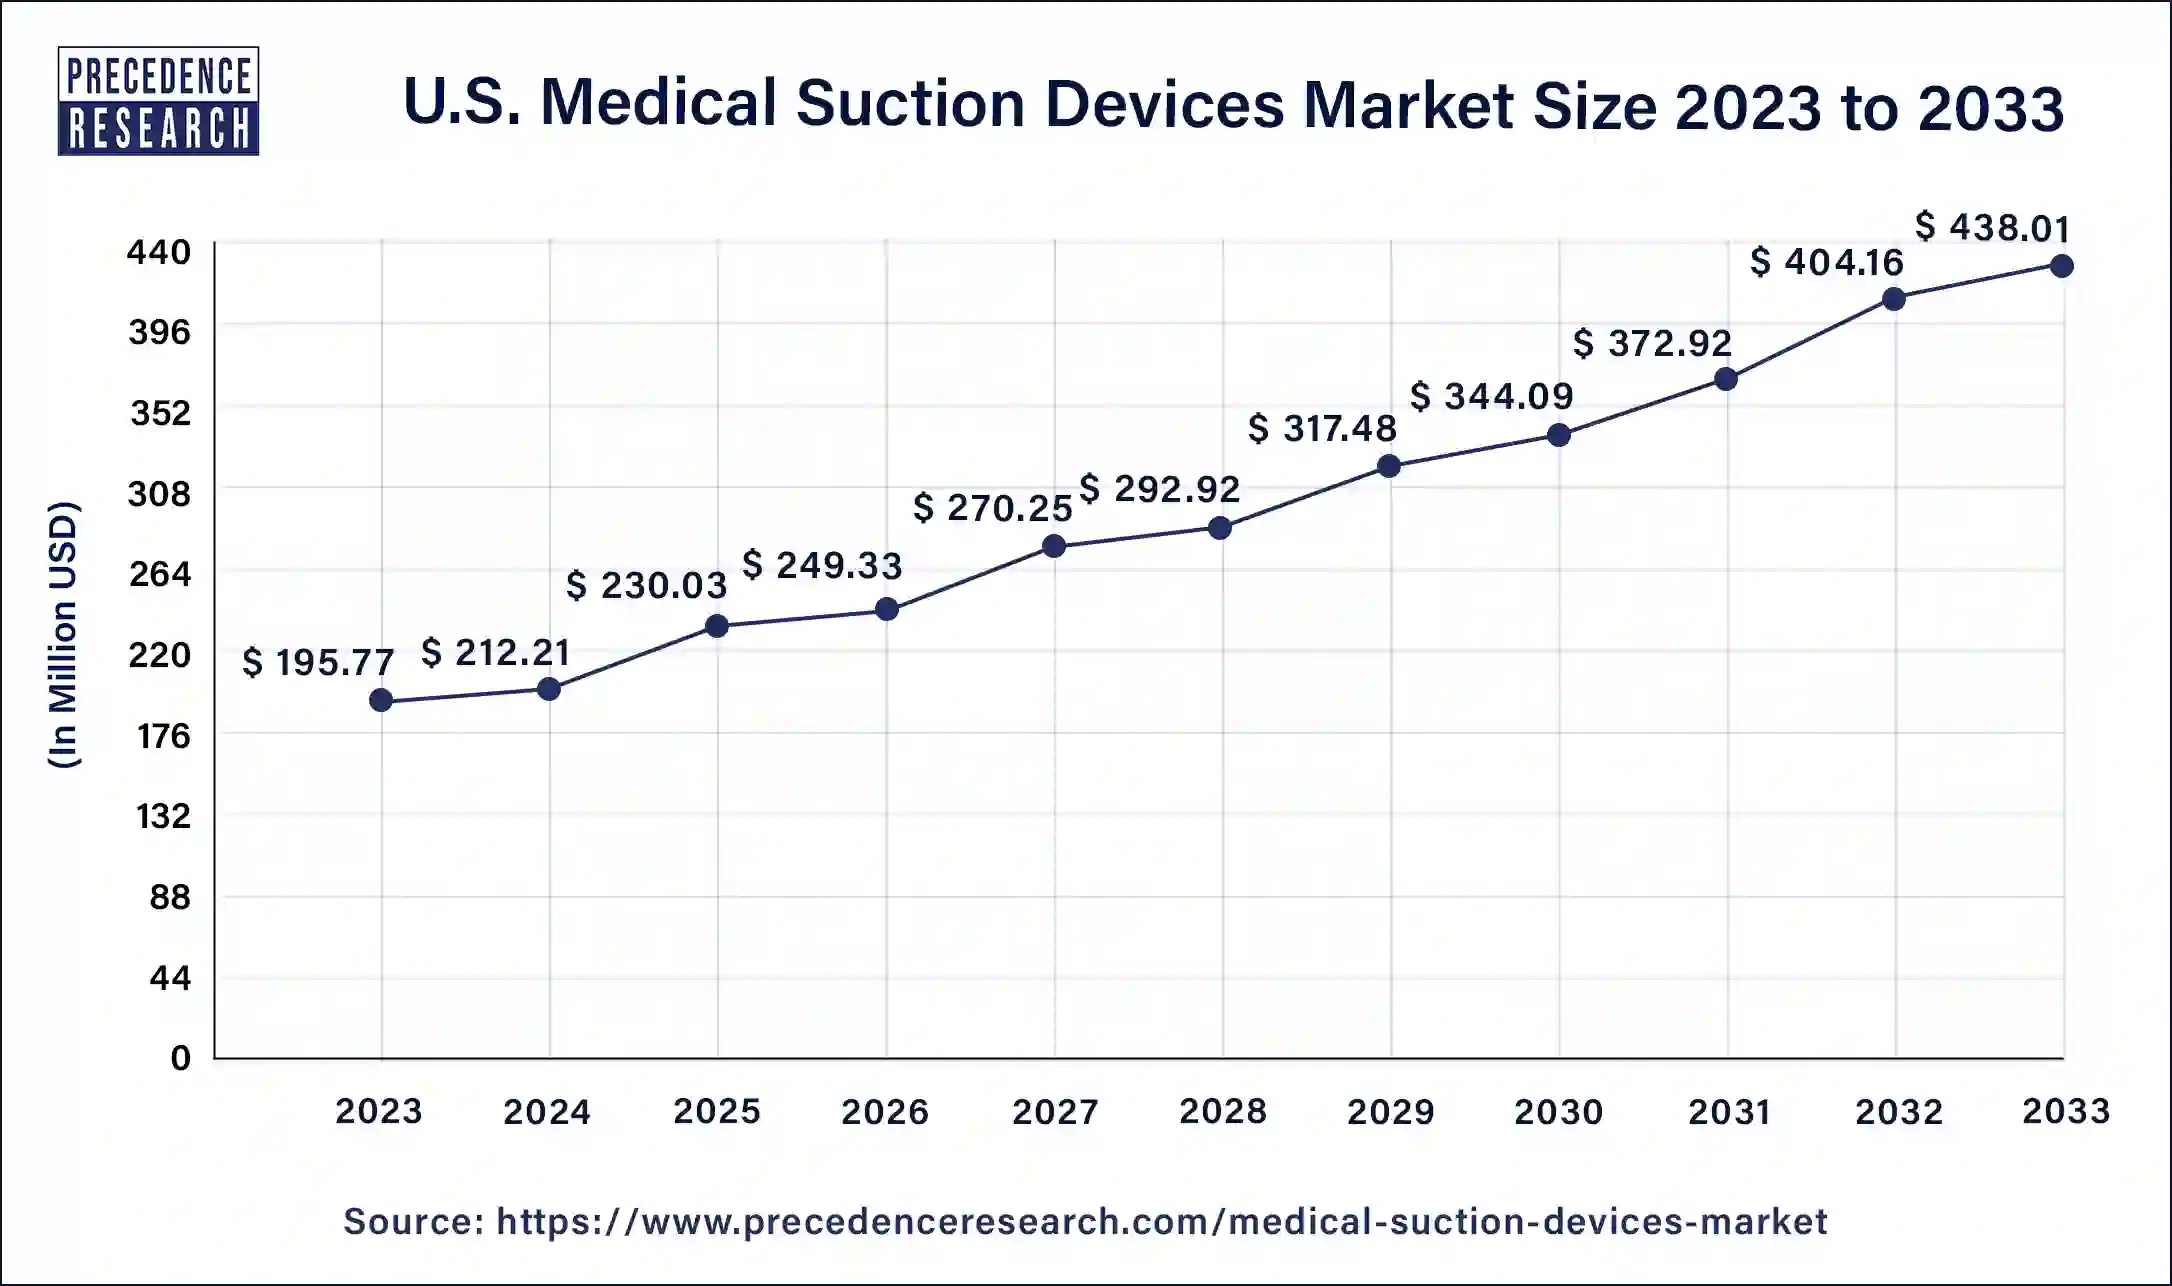 U.S. Medical Suction Devices Market Size 2024 to 2033